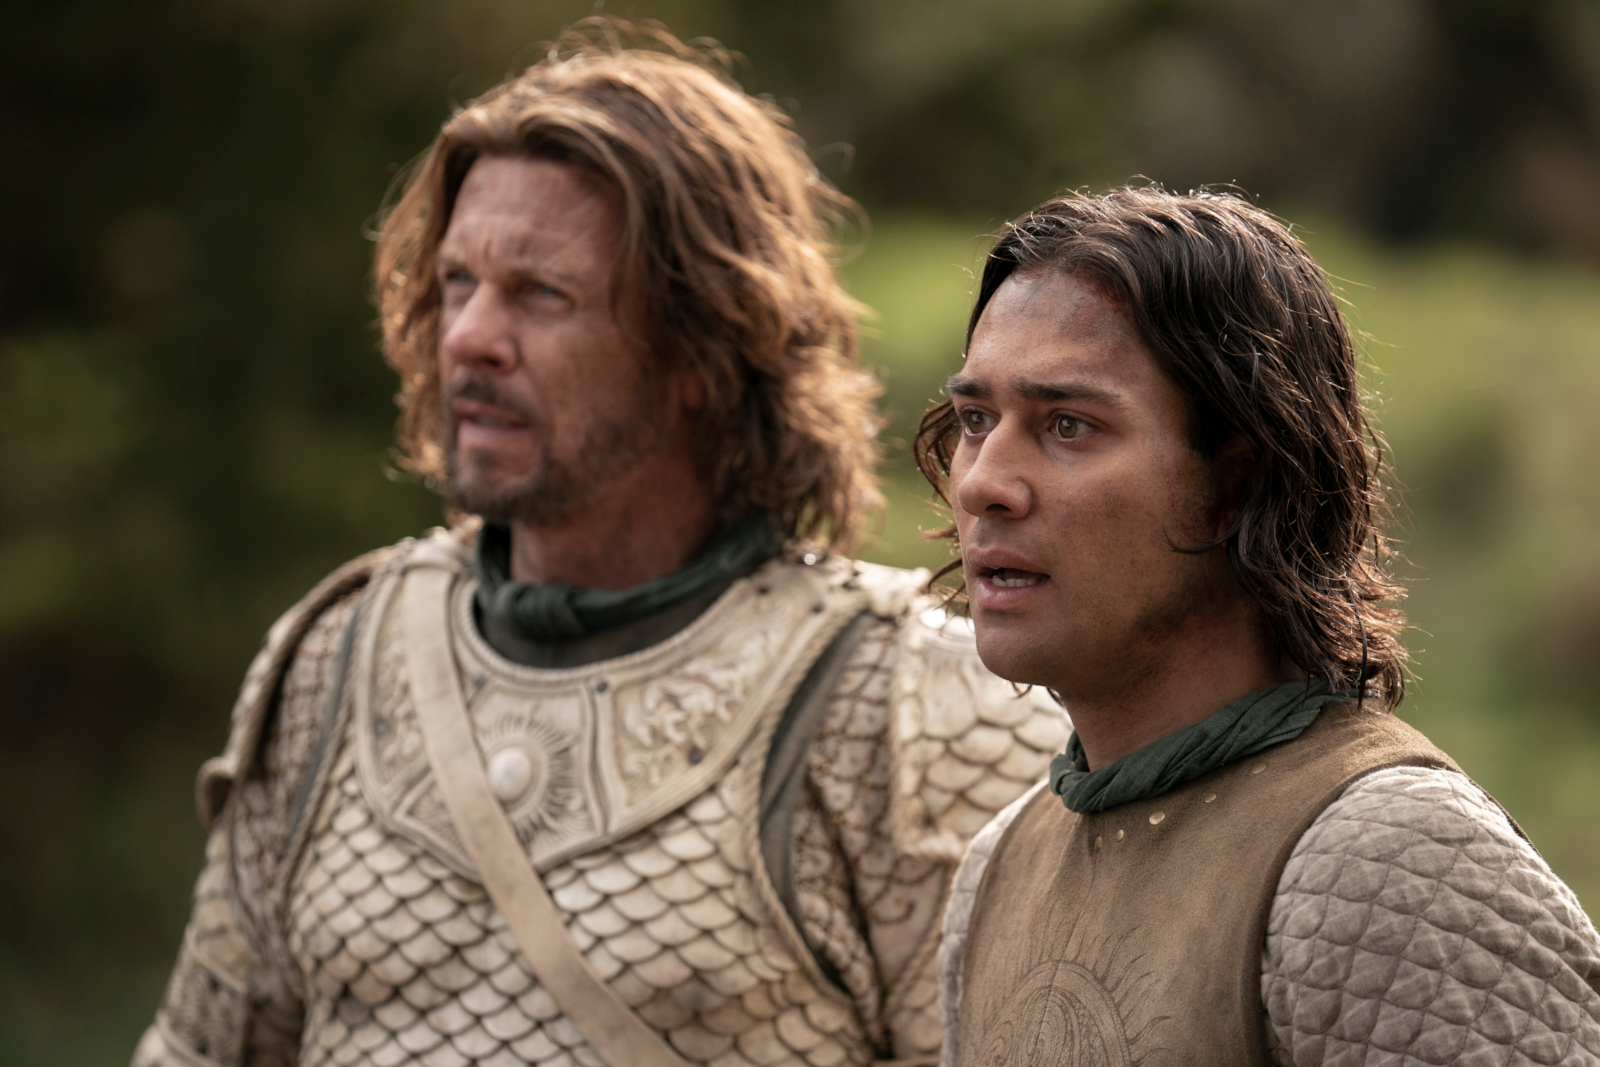 Lloyd Owen and Maxim Baldry as Elendil and Isildur in 'The Rings of Power' Episode 6 for our article about its Easter Eggs. They're wearing golden armor and look shocked.